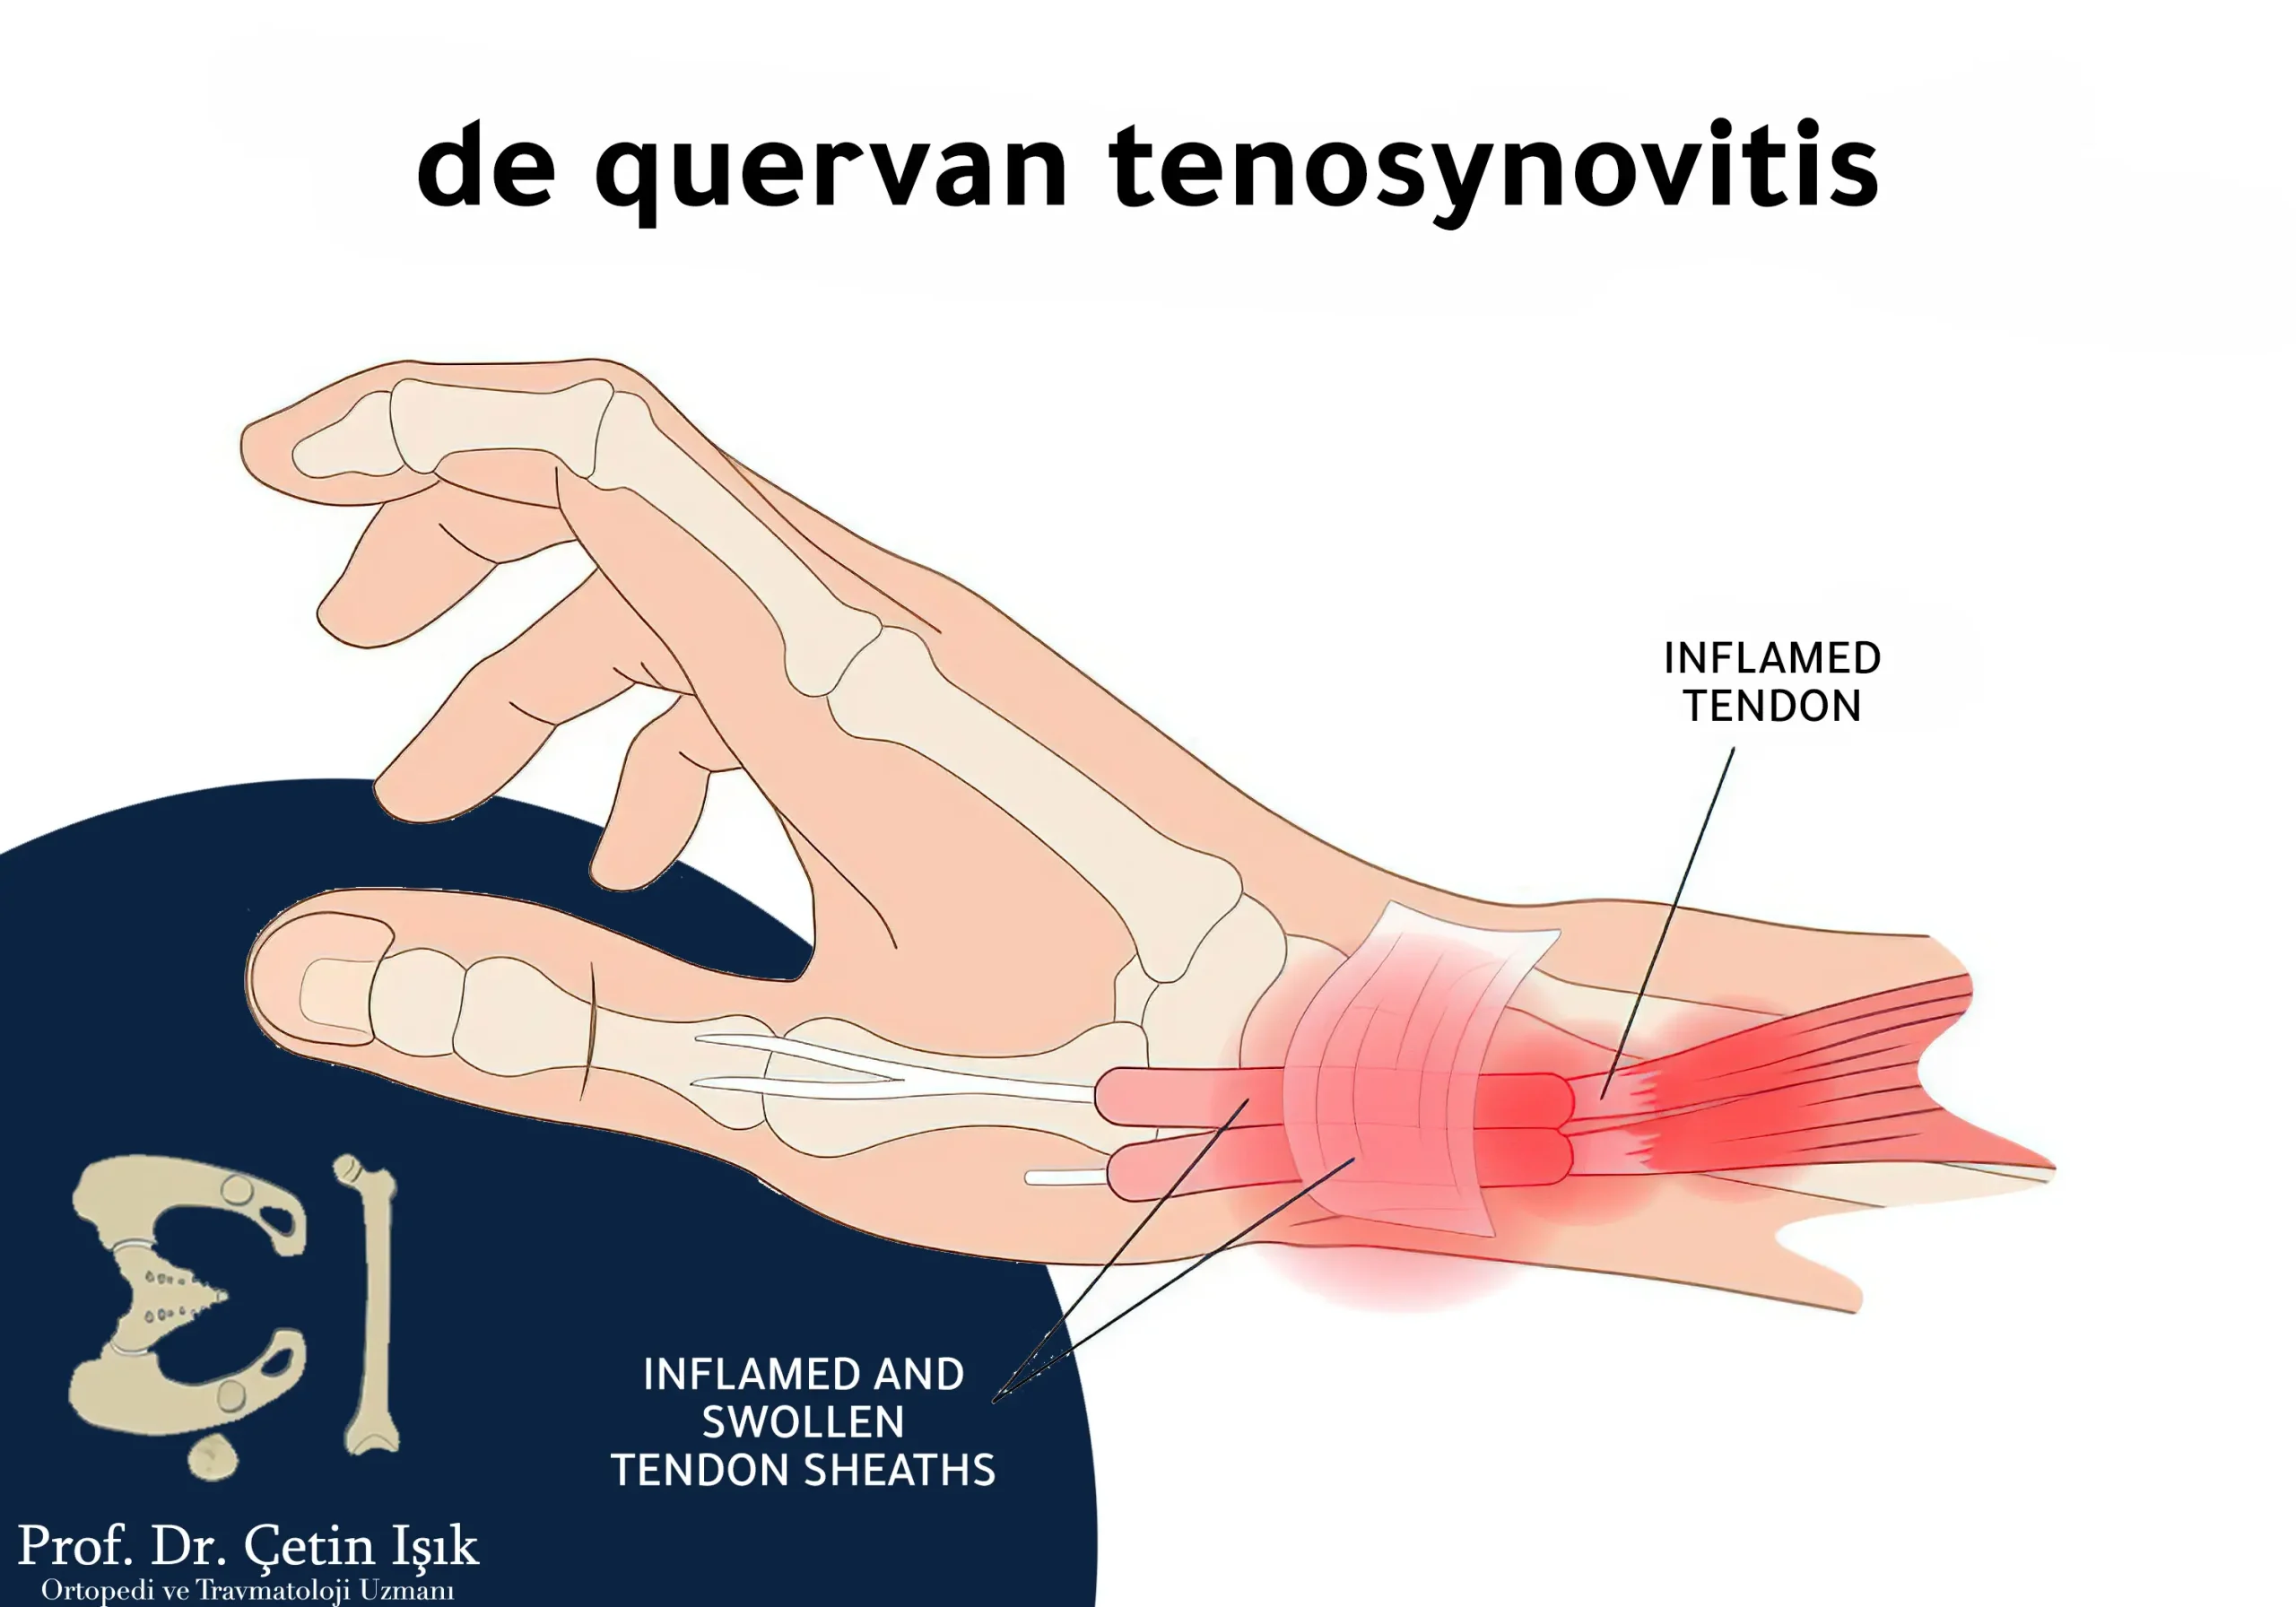 Image showing the location and location of de Quervain's tendon inflammation